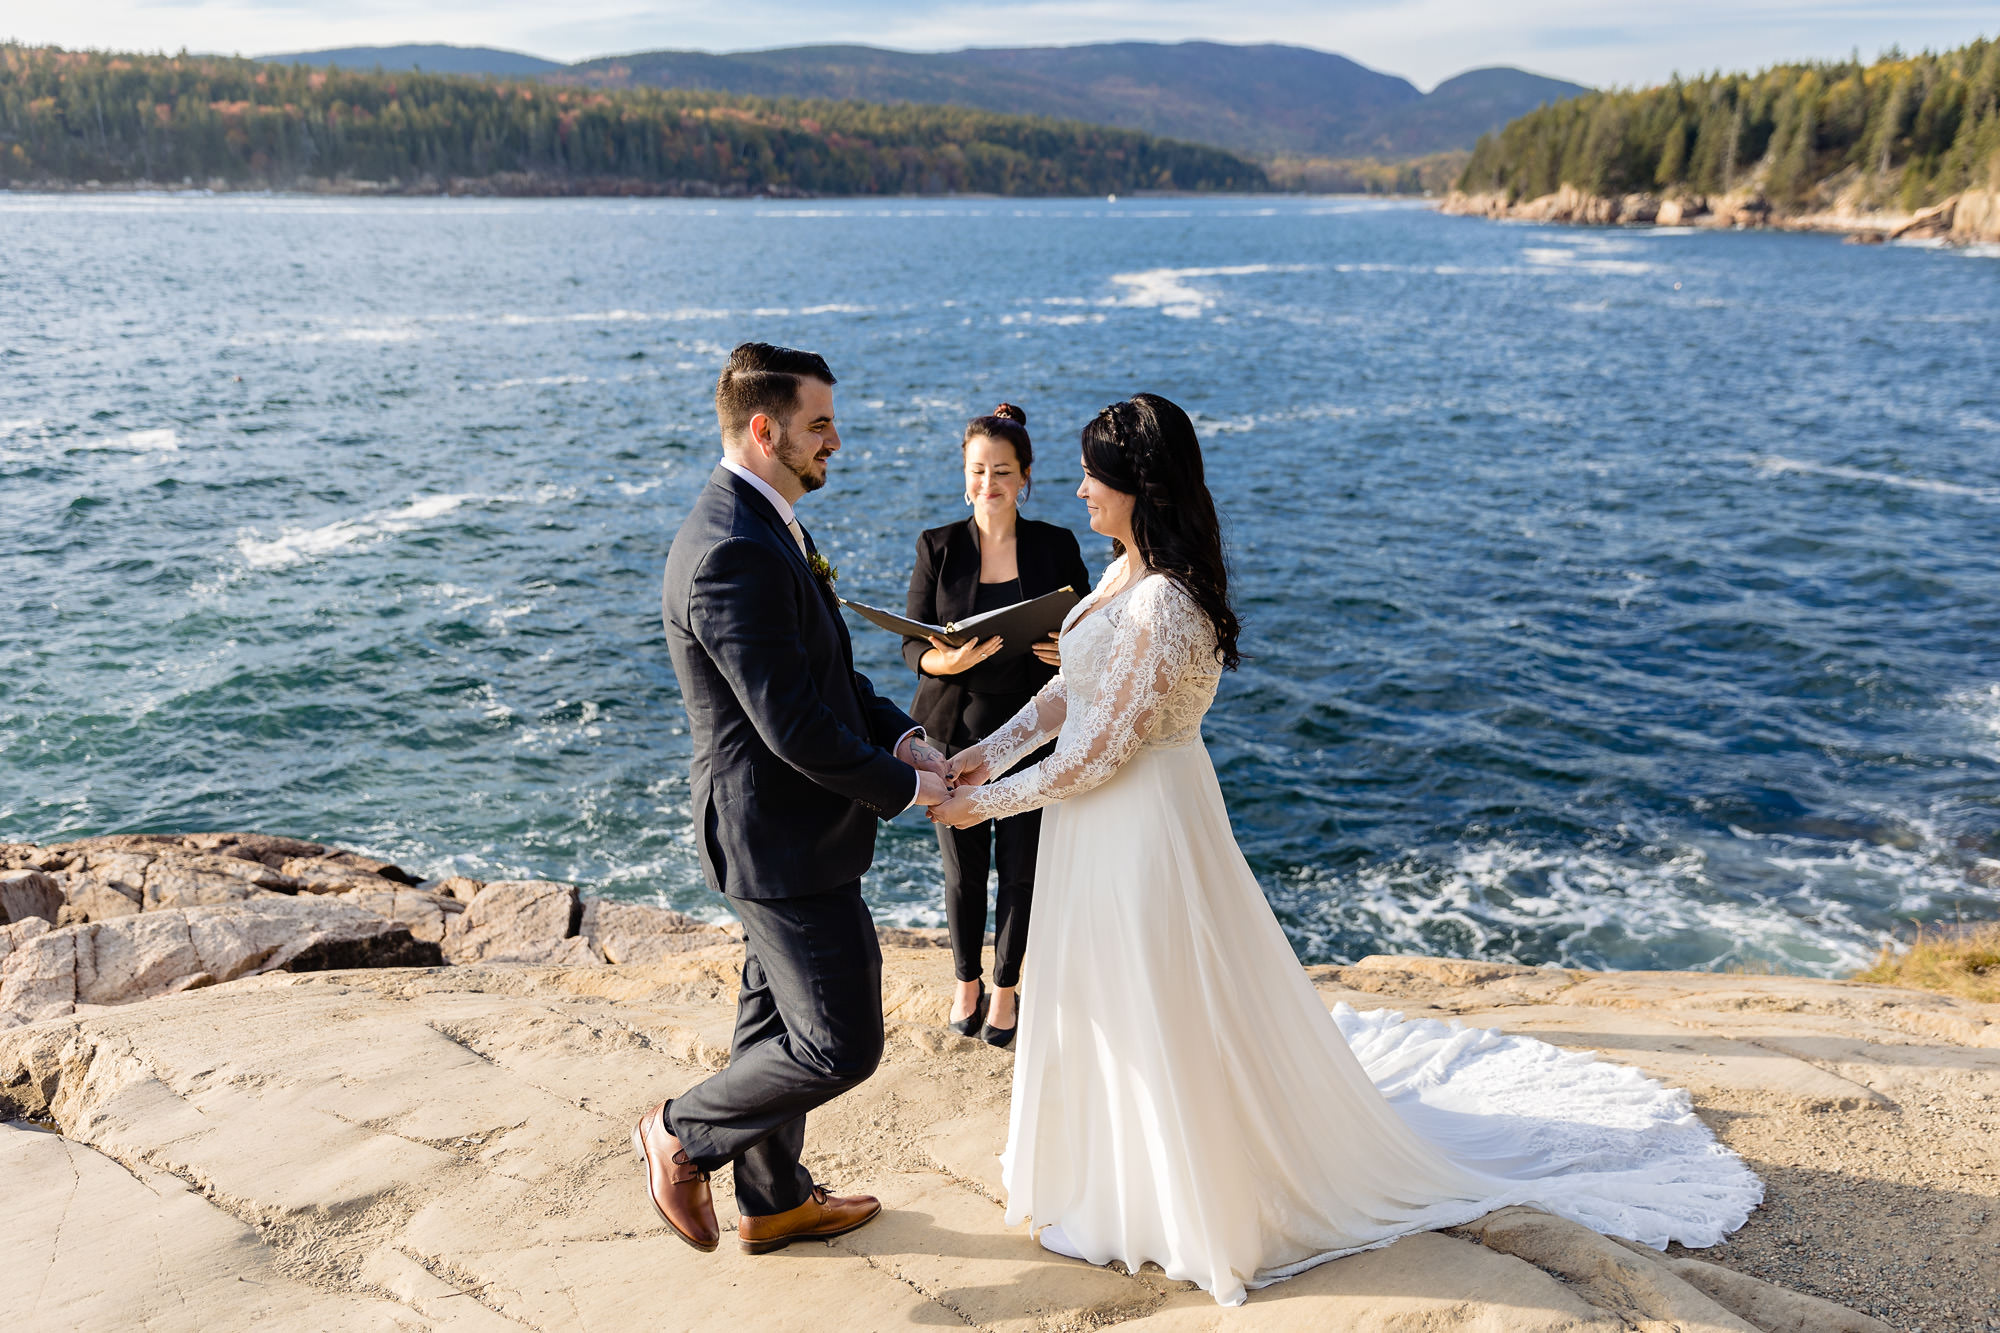 A wedding ceremony on the cliffs in Acadia National Park